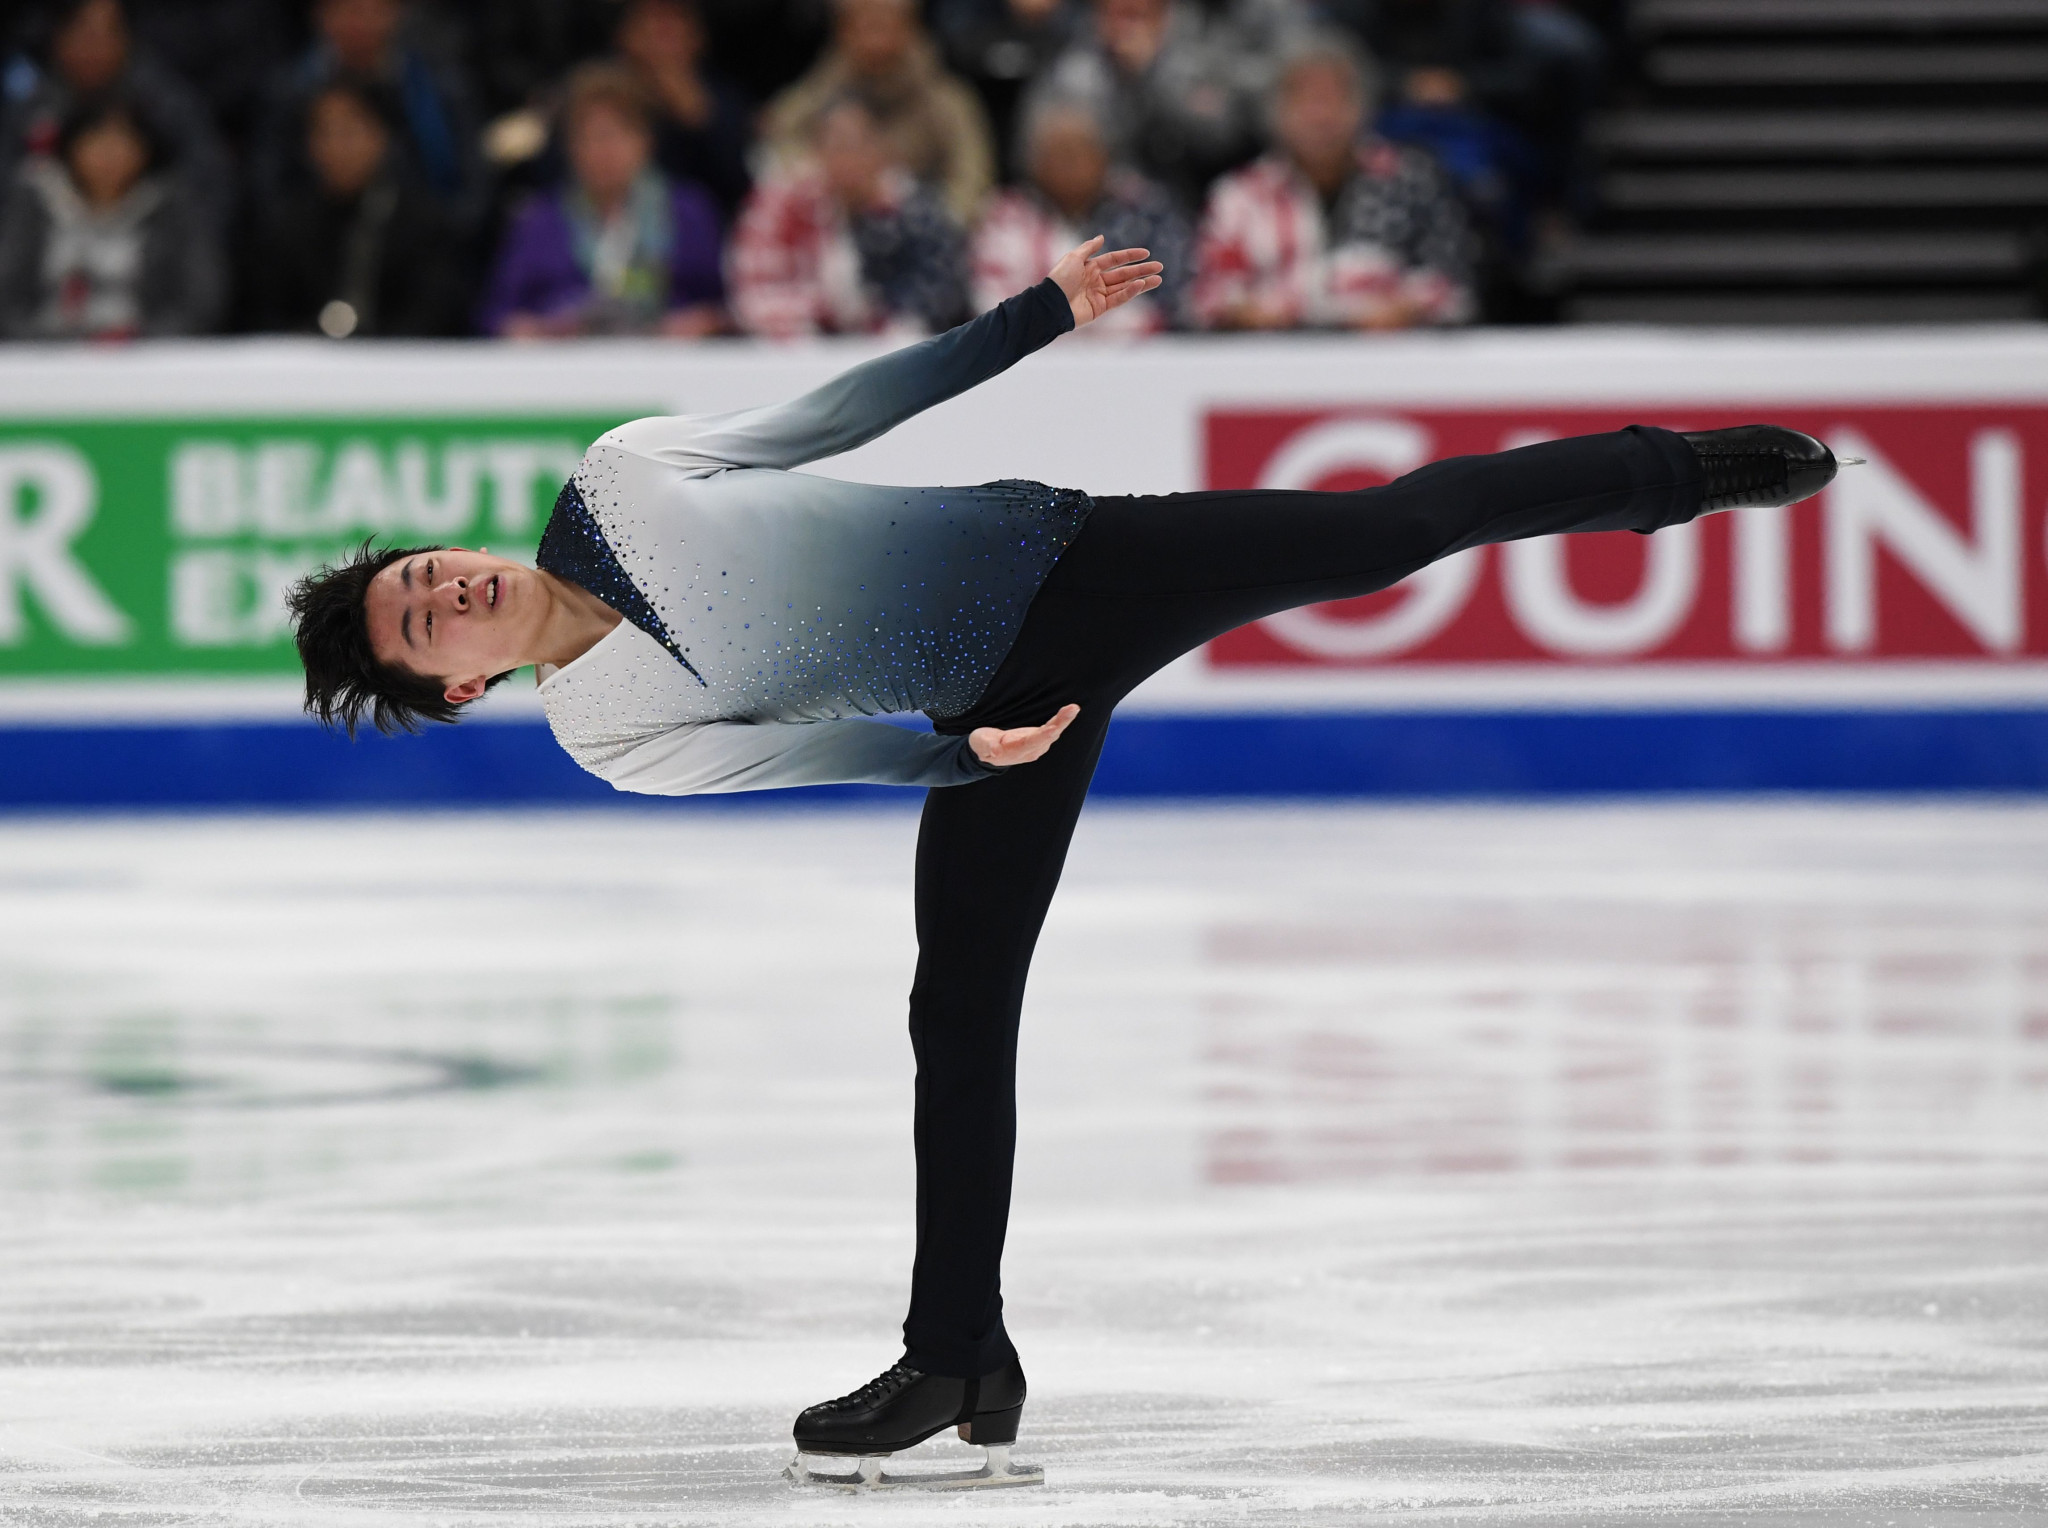 America's Vincent Zhou leads the men's competition after the short programme at the SU Four Continents Figure Skating Championships in Anaheim ©Getty Images